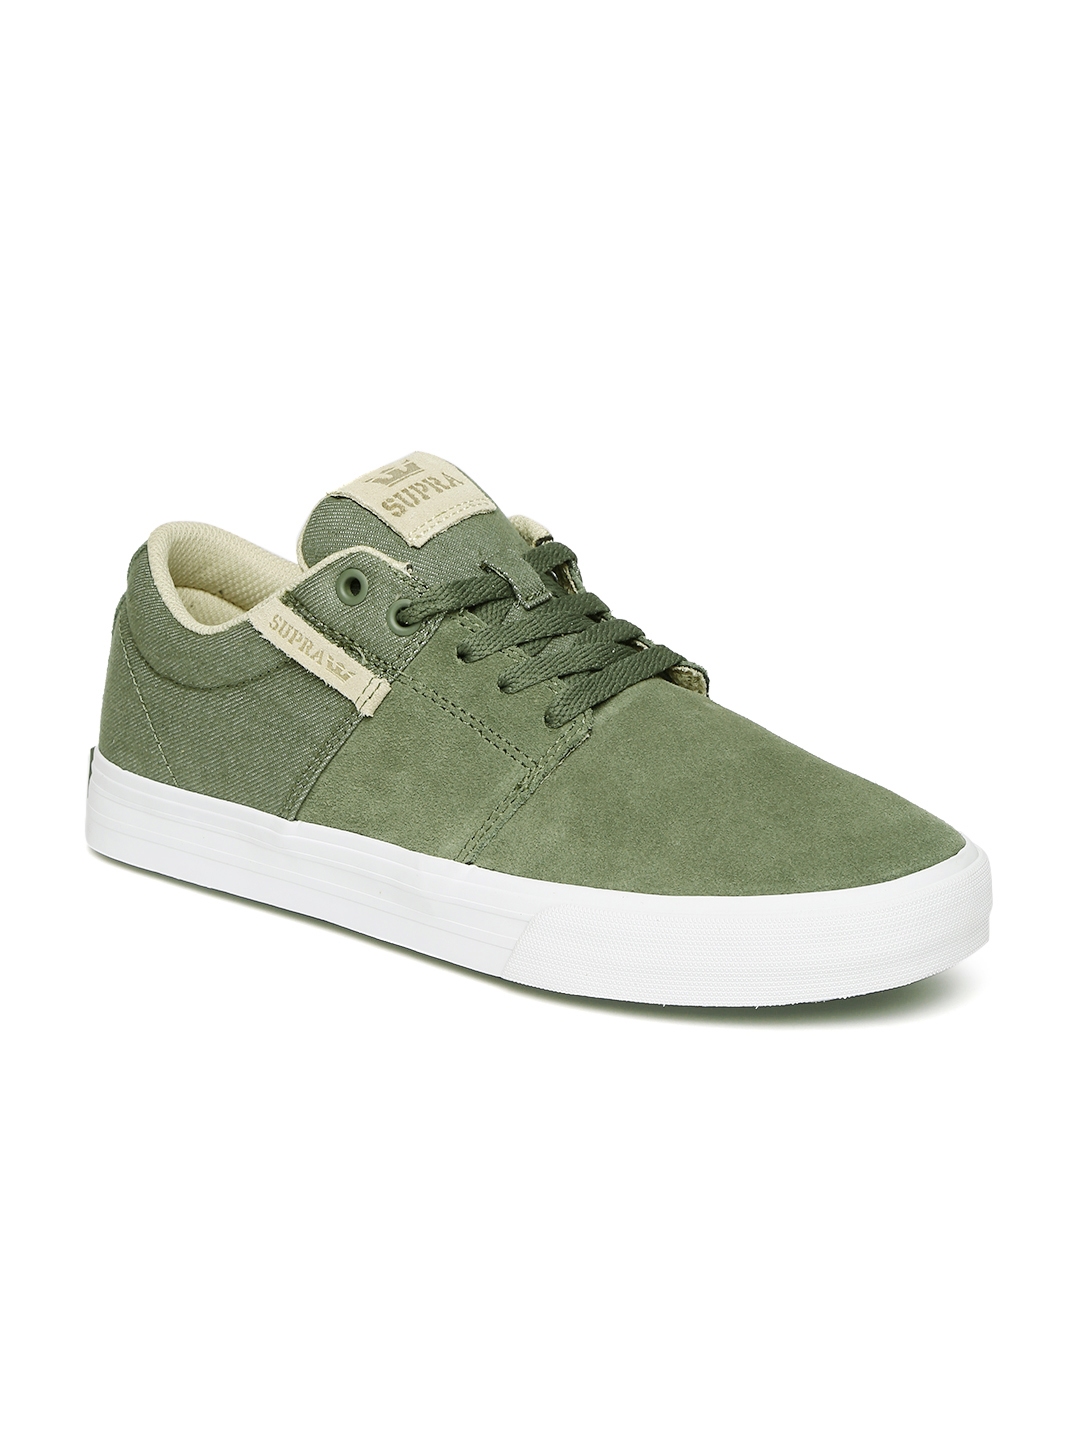 Buy Supra Men Olive Green Suede Sneakers - Casual Shoes for Men 1888481 ...